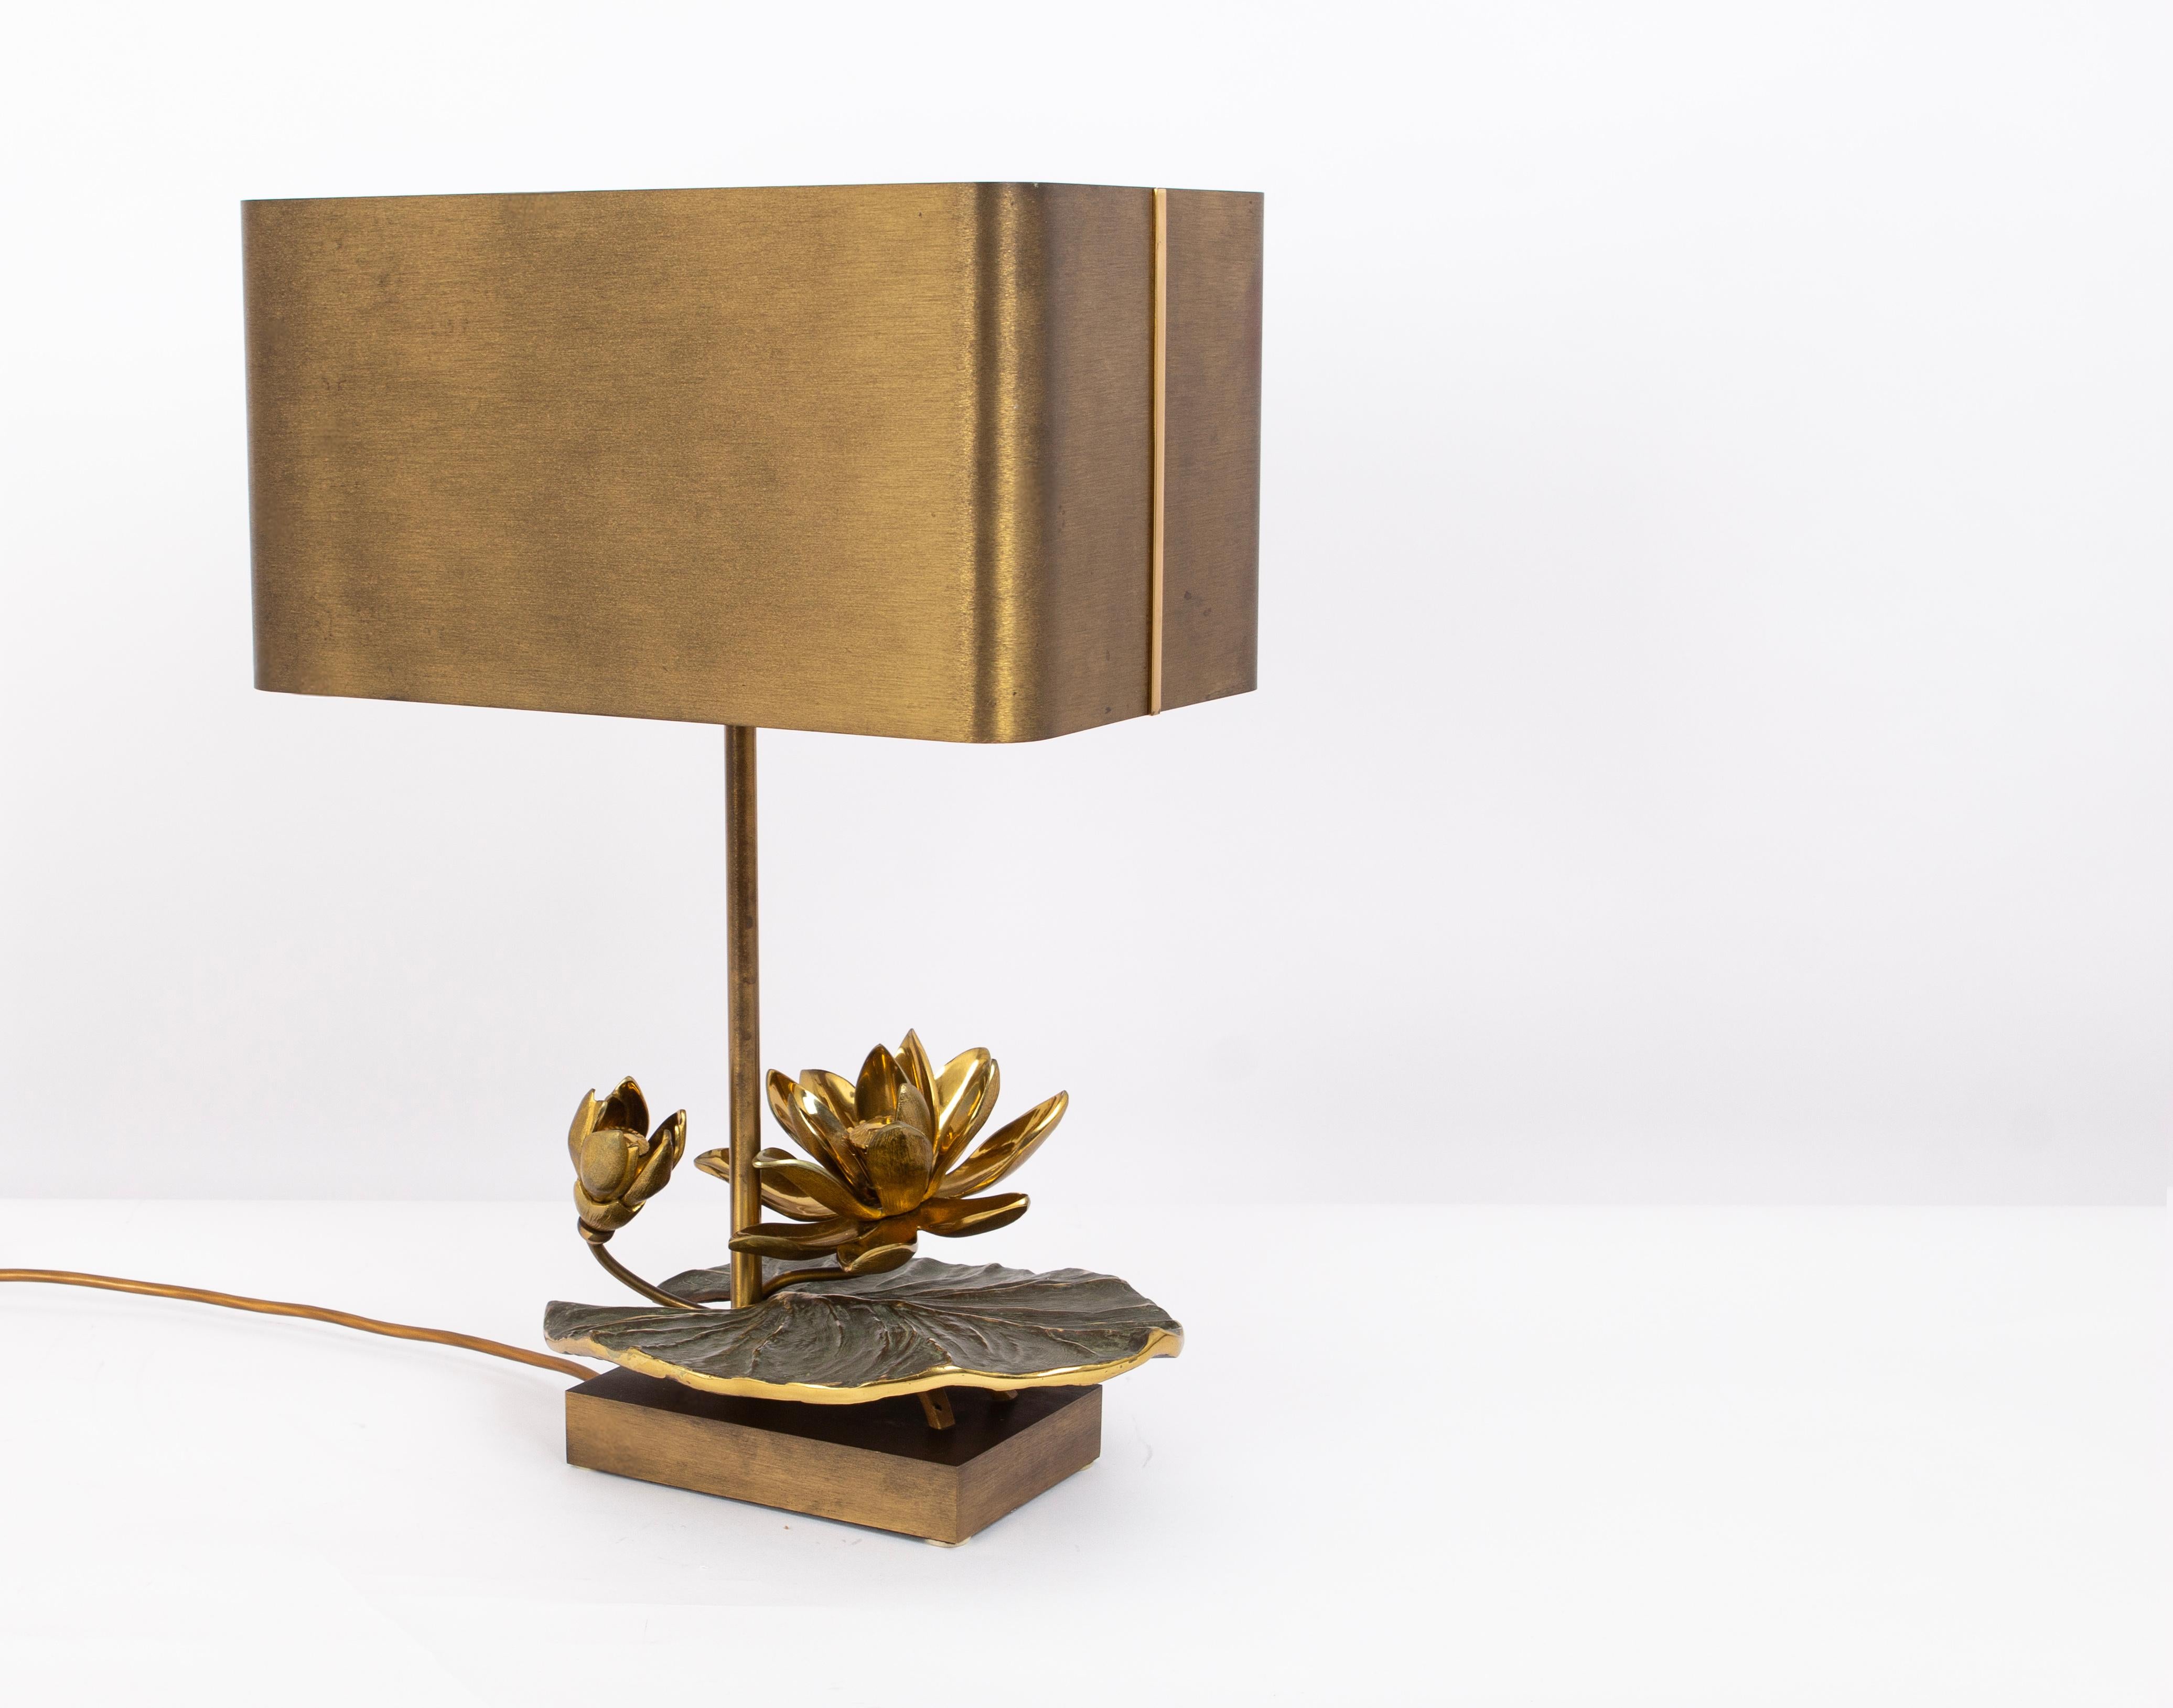 Elegant brass table lamps Model Water Lilly. Designed by Maison Charles, France, 1970s.
The 'Water Lily' model is a celebration of nature's beauty and artistry. The base of the lamp takes its inspiration from the delicate and graceful form of water